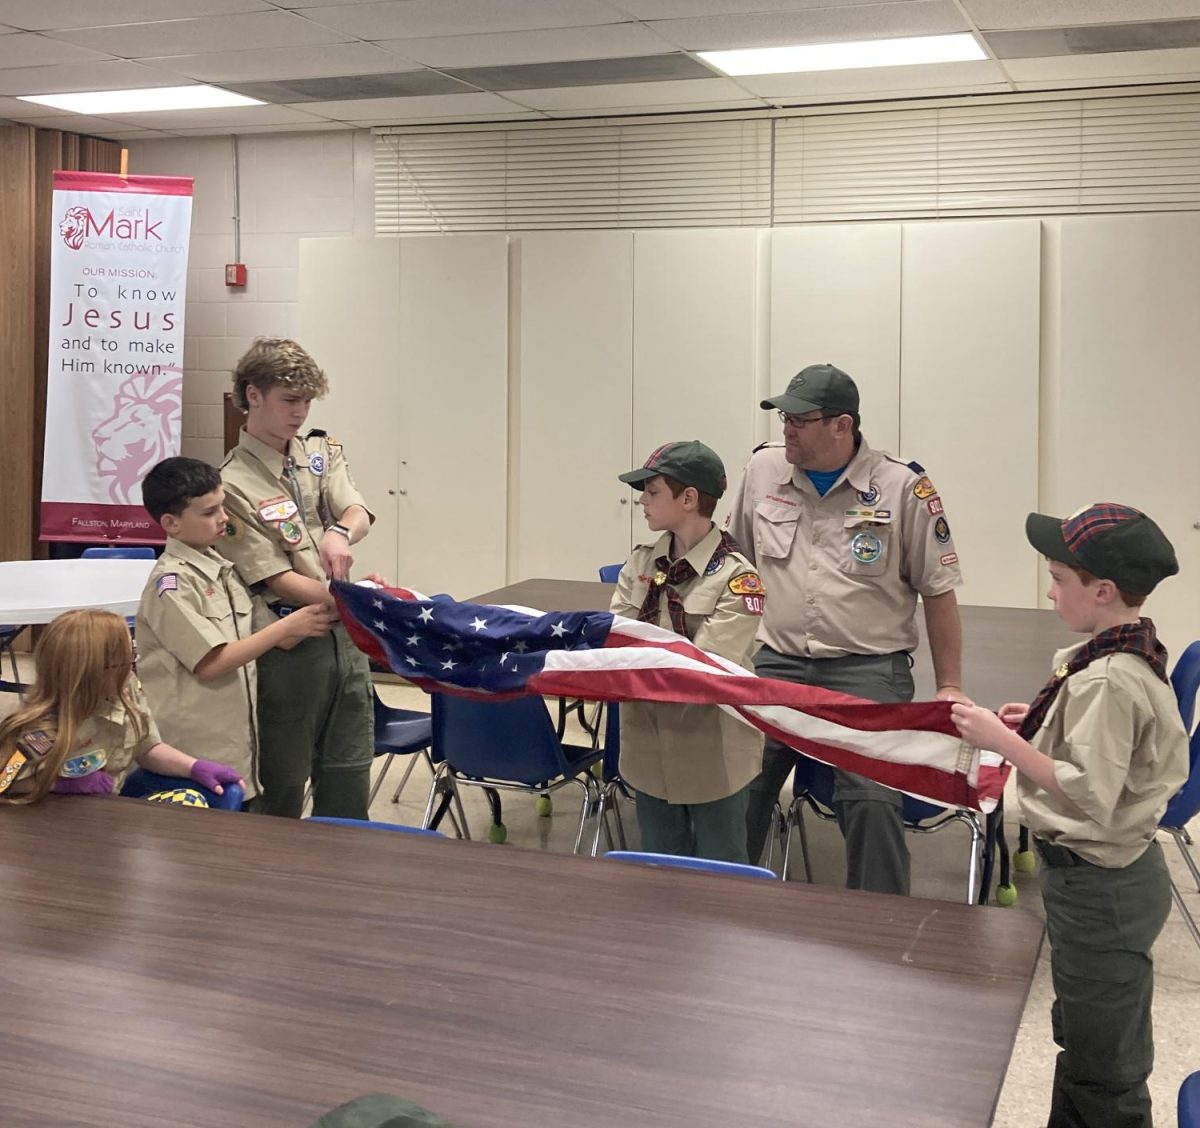 Nate showing future eagle scouts how to fold the American flag. (Photo Courtesy of Ms. Grant)